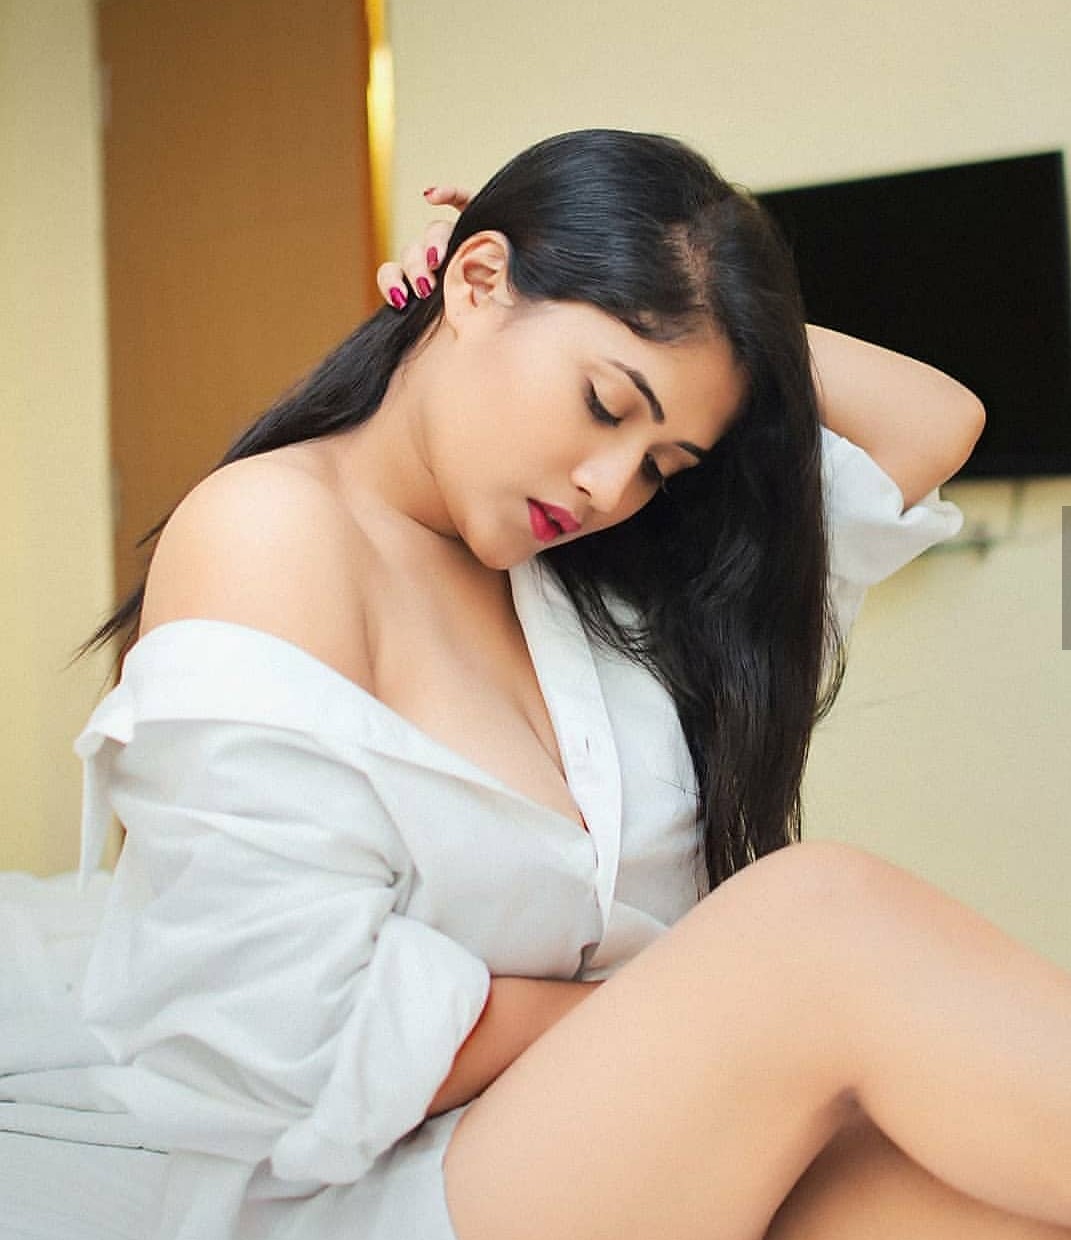 delhi 9711168618 Welcome To Vip Escort Services In Delhi [ ]Noida Gurg,South West Delhi,Others,Free Classifieds,Post Free Ads,77traders.com